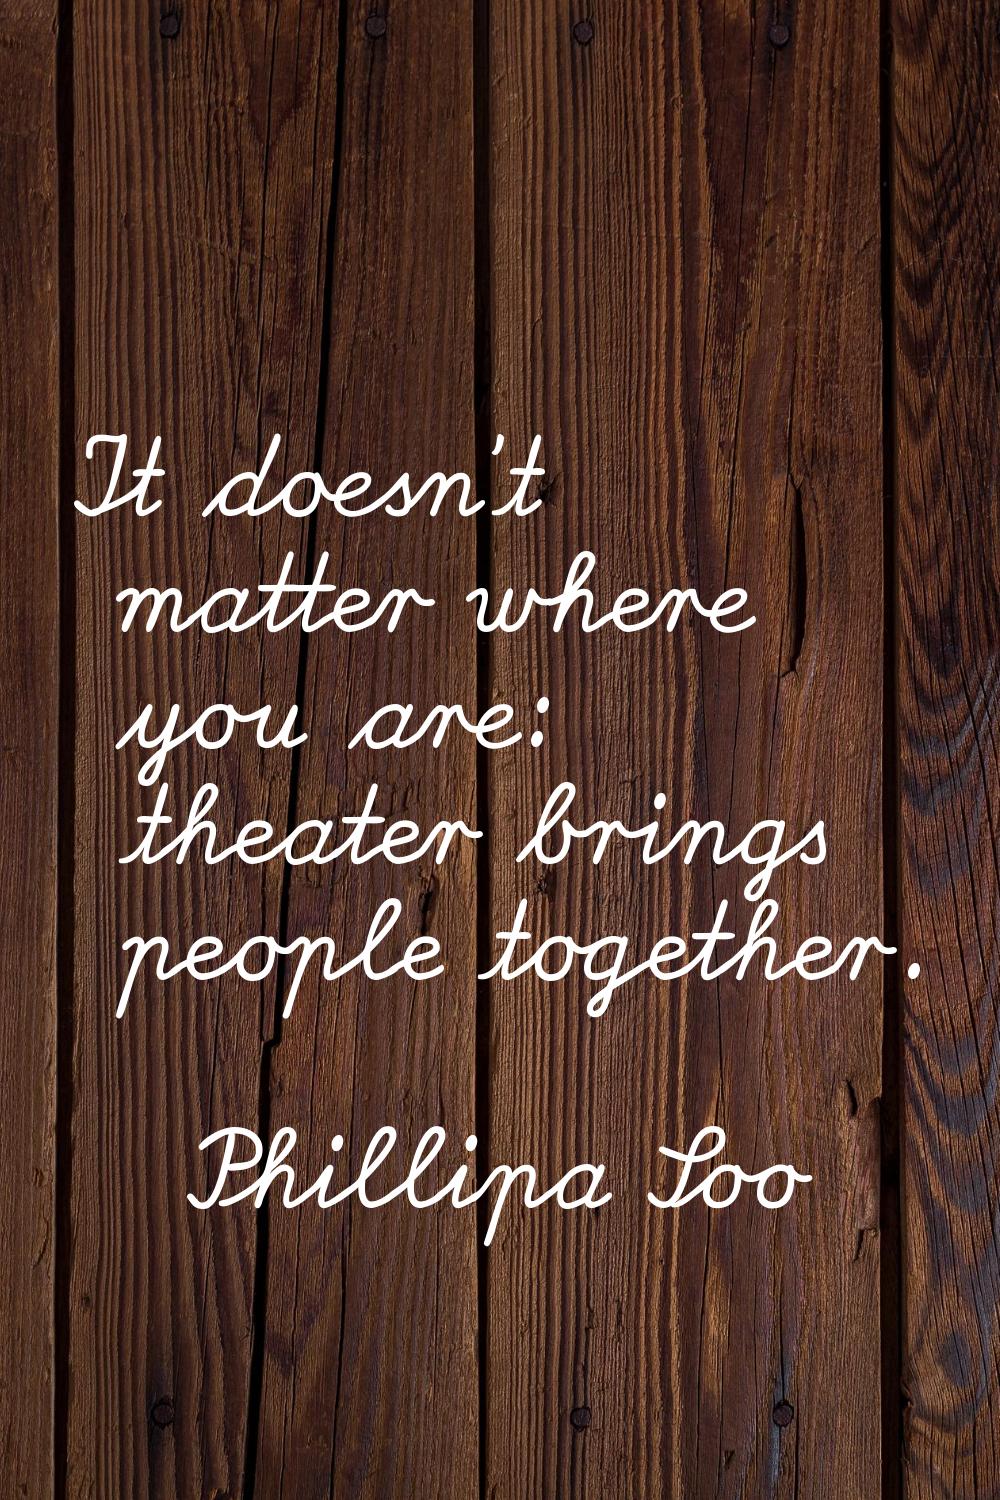 It doesn't matter where you are: theater brings people together.